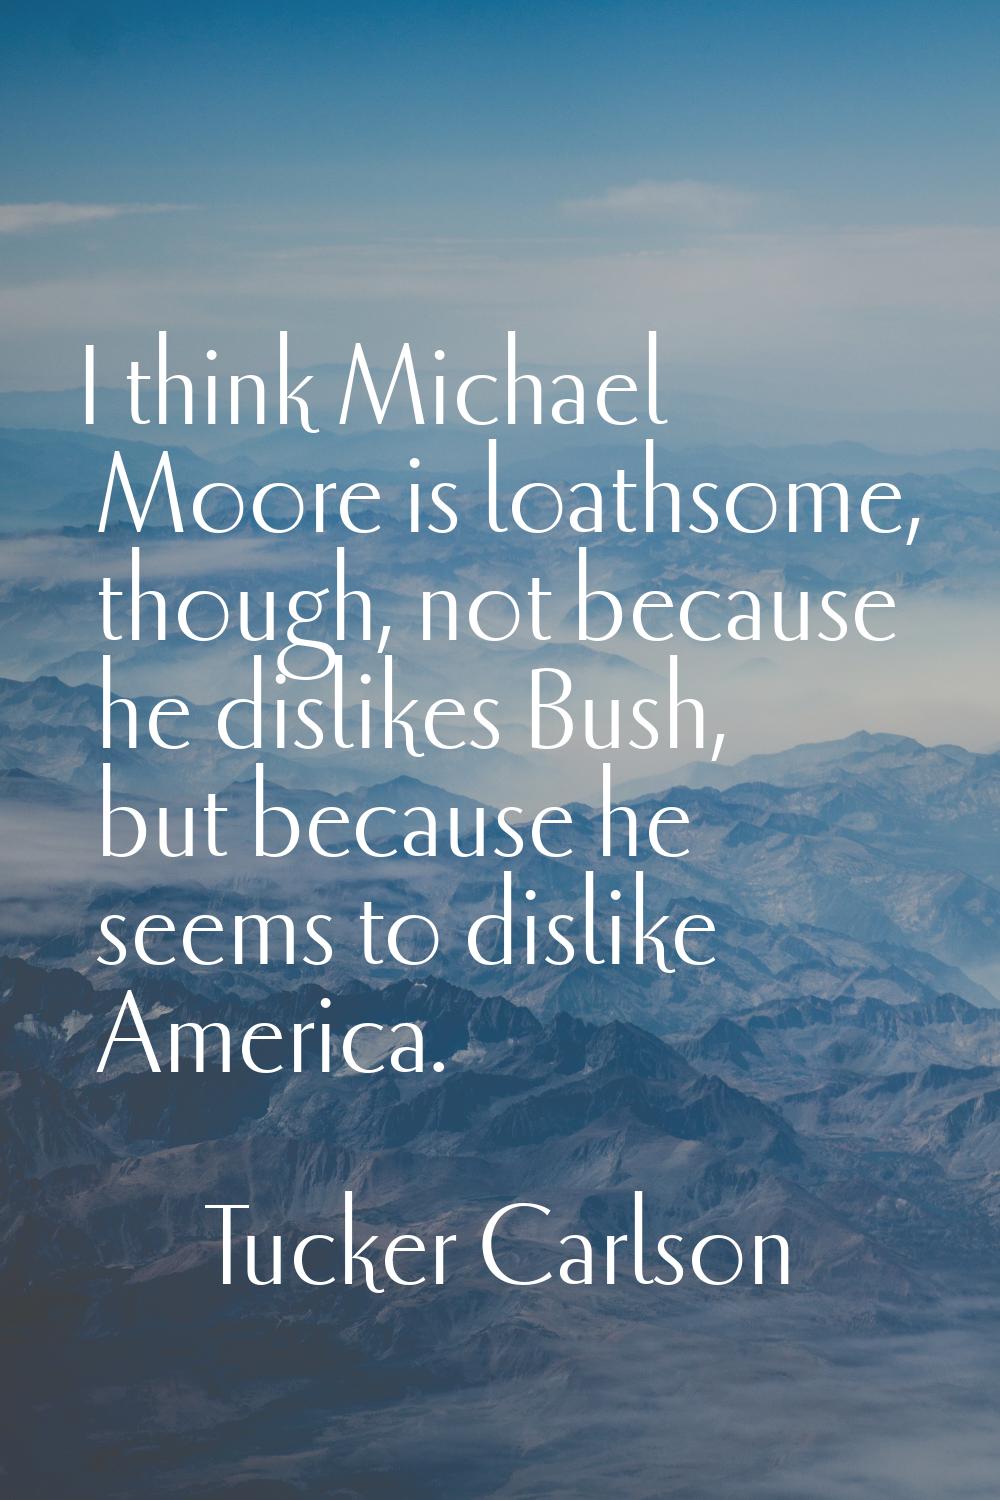 I think Michael Moore is loathsome, though, not because he dislikes Bush, but because he seems to d